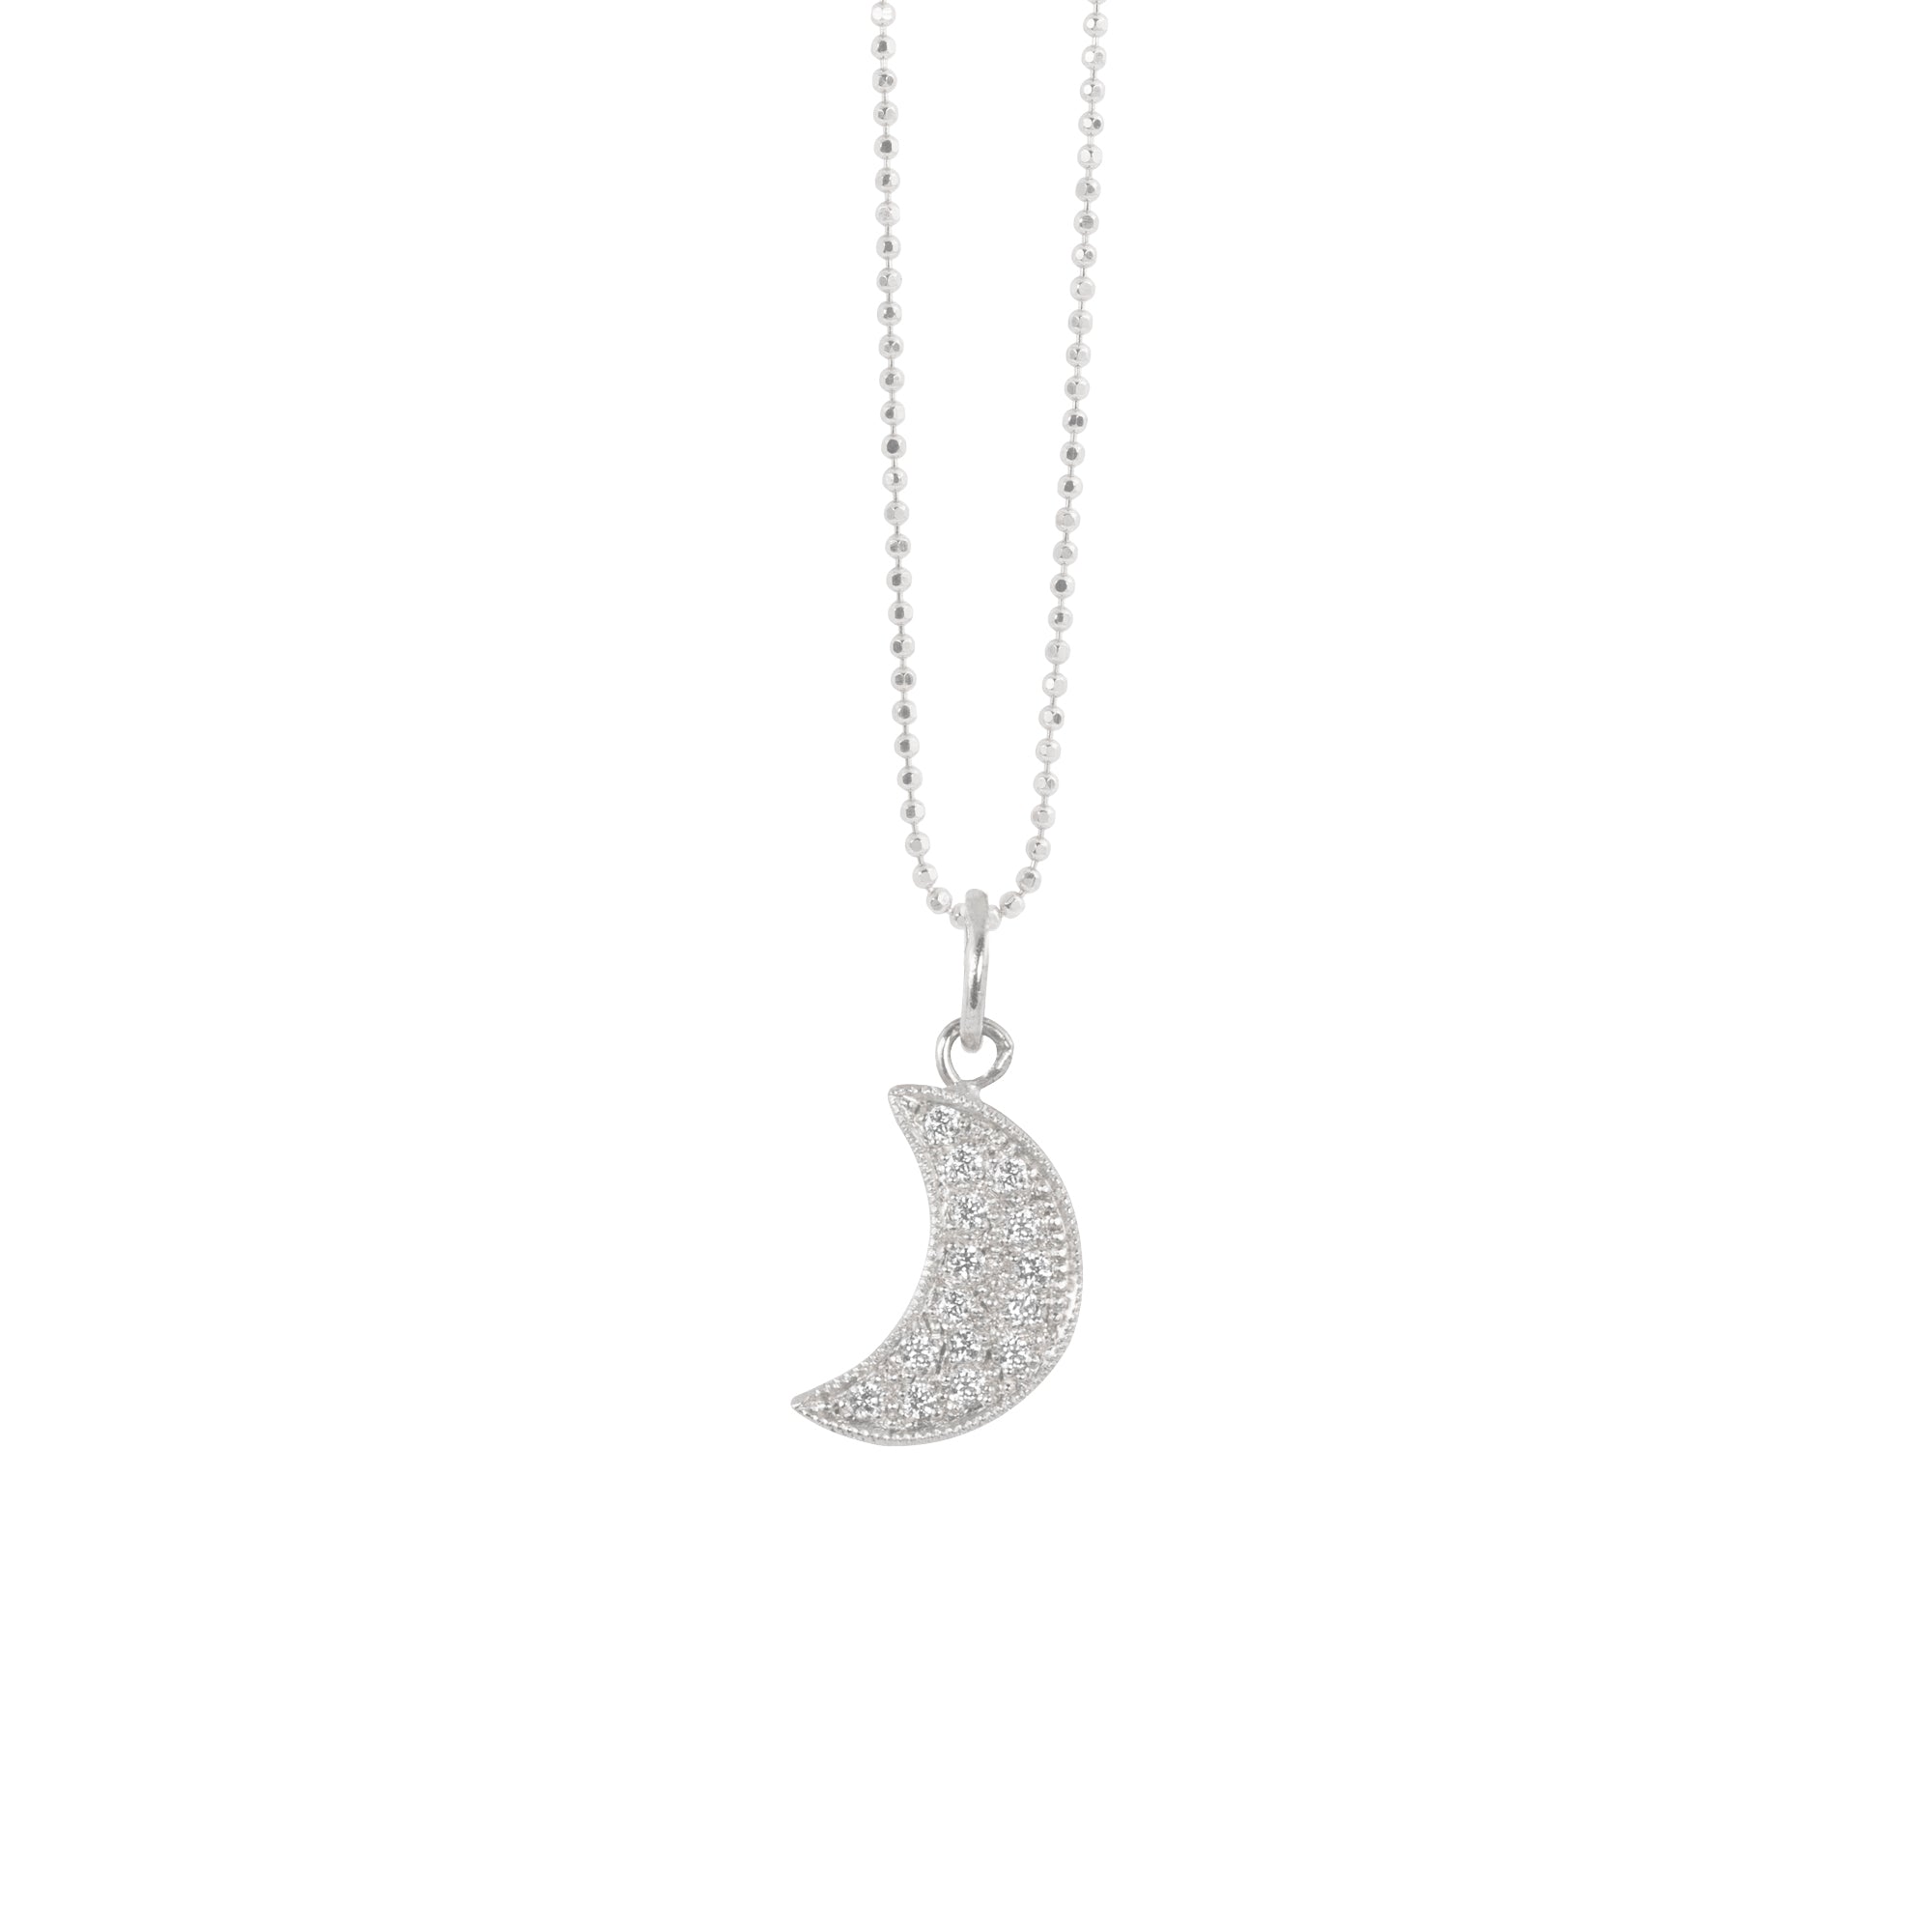 14k white gold baby ALER moon charm with scattered diamonds